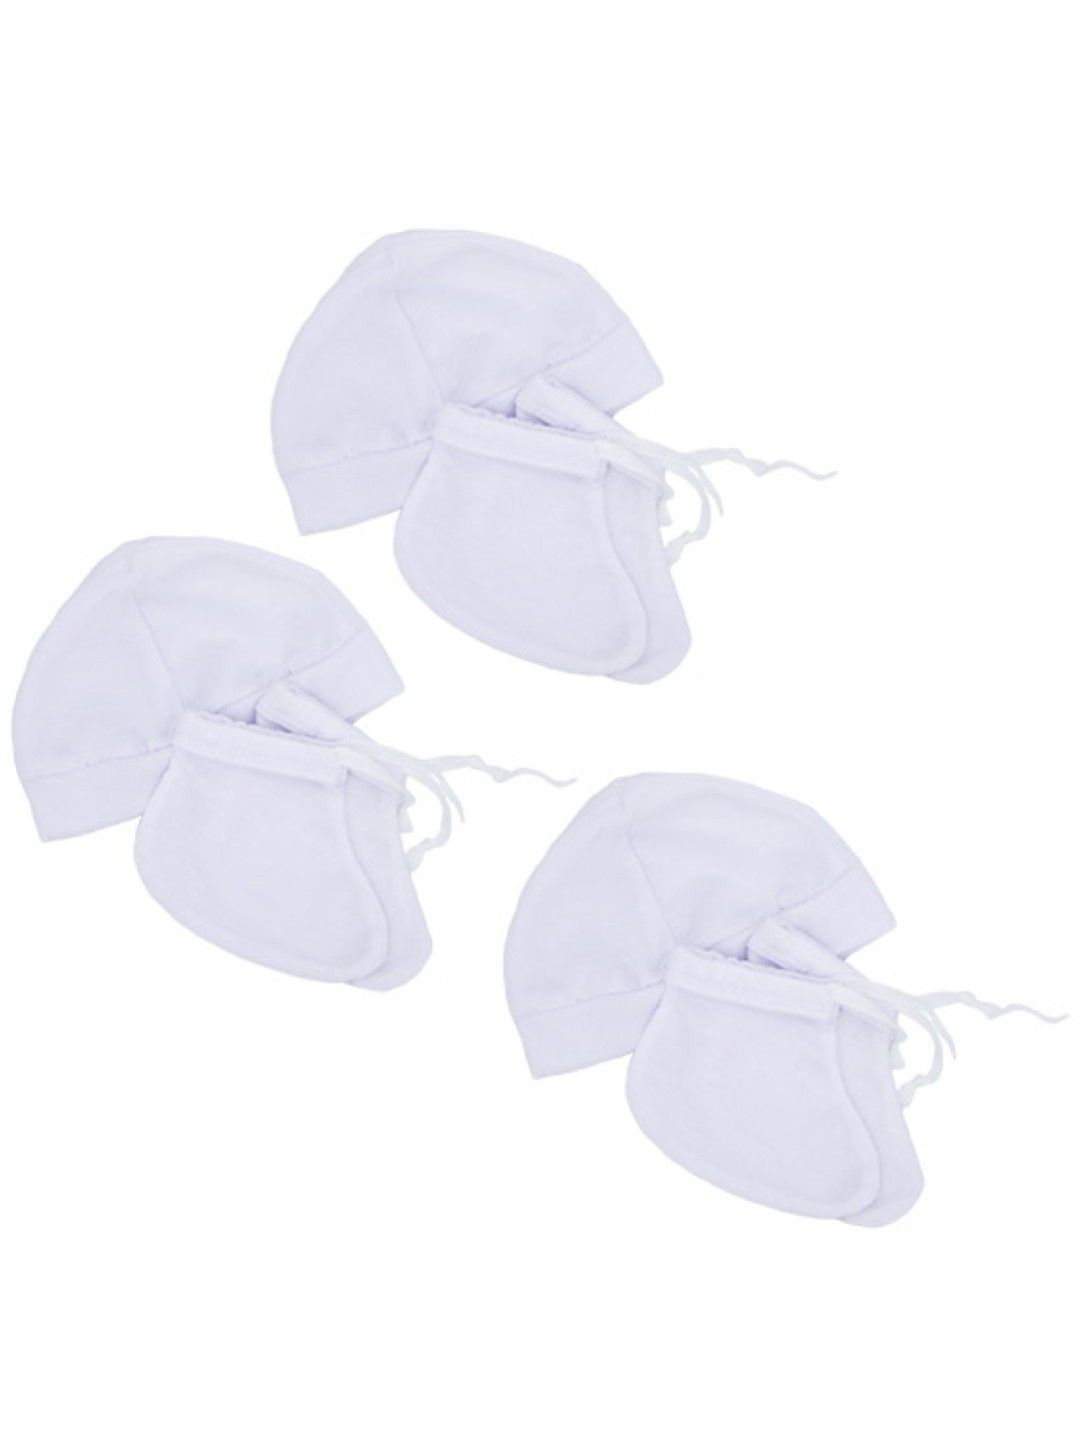 BestCare Baby Bonnet and Booties Pack of 3